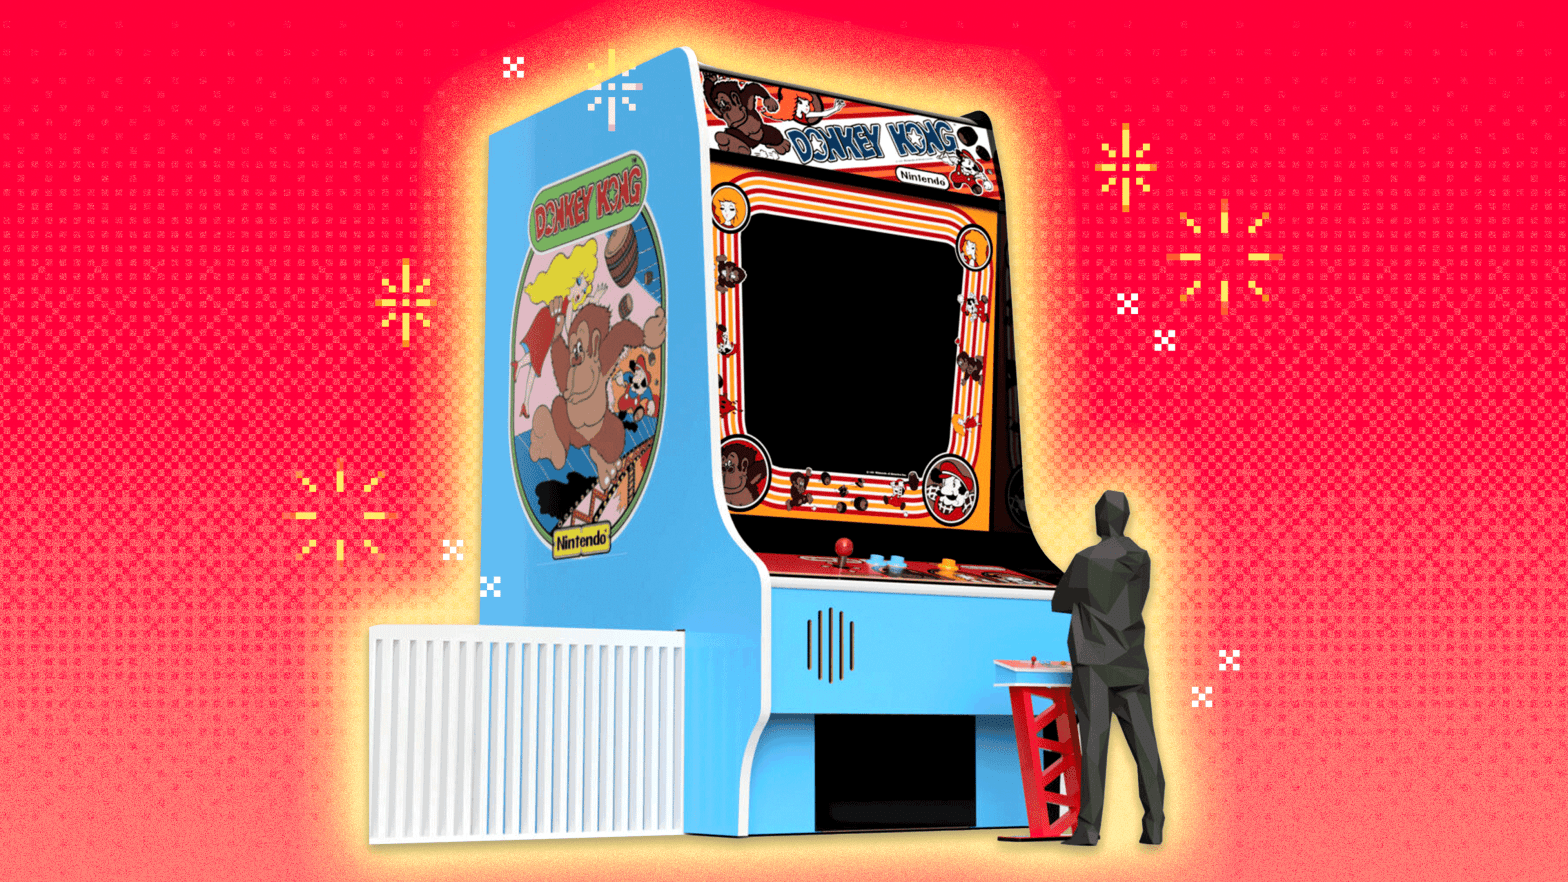 The Strong museum's planned 6.10 m tall Donkey Kong arcade cabinet will use regularly-sized controls for users on the ground. The rest will be made with aluminium and MDF fiberboard. (Image: The Strong National Museum of Play / Vicky Leta/ Shutterstock)